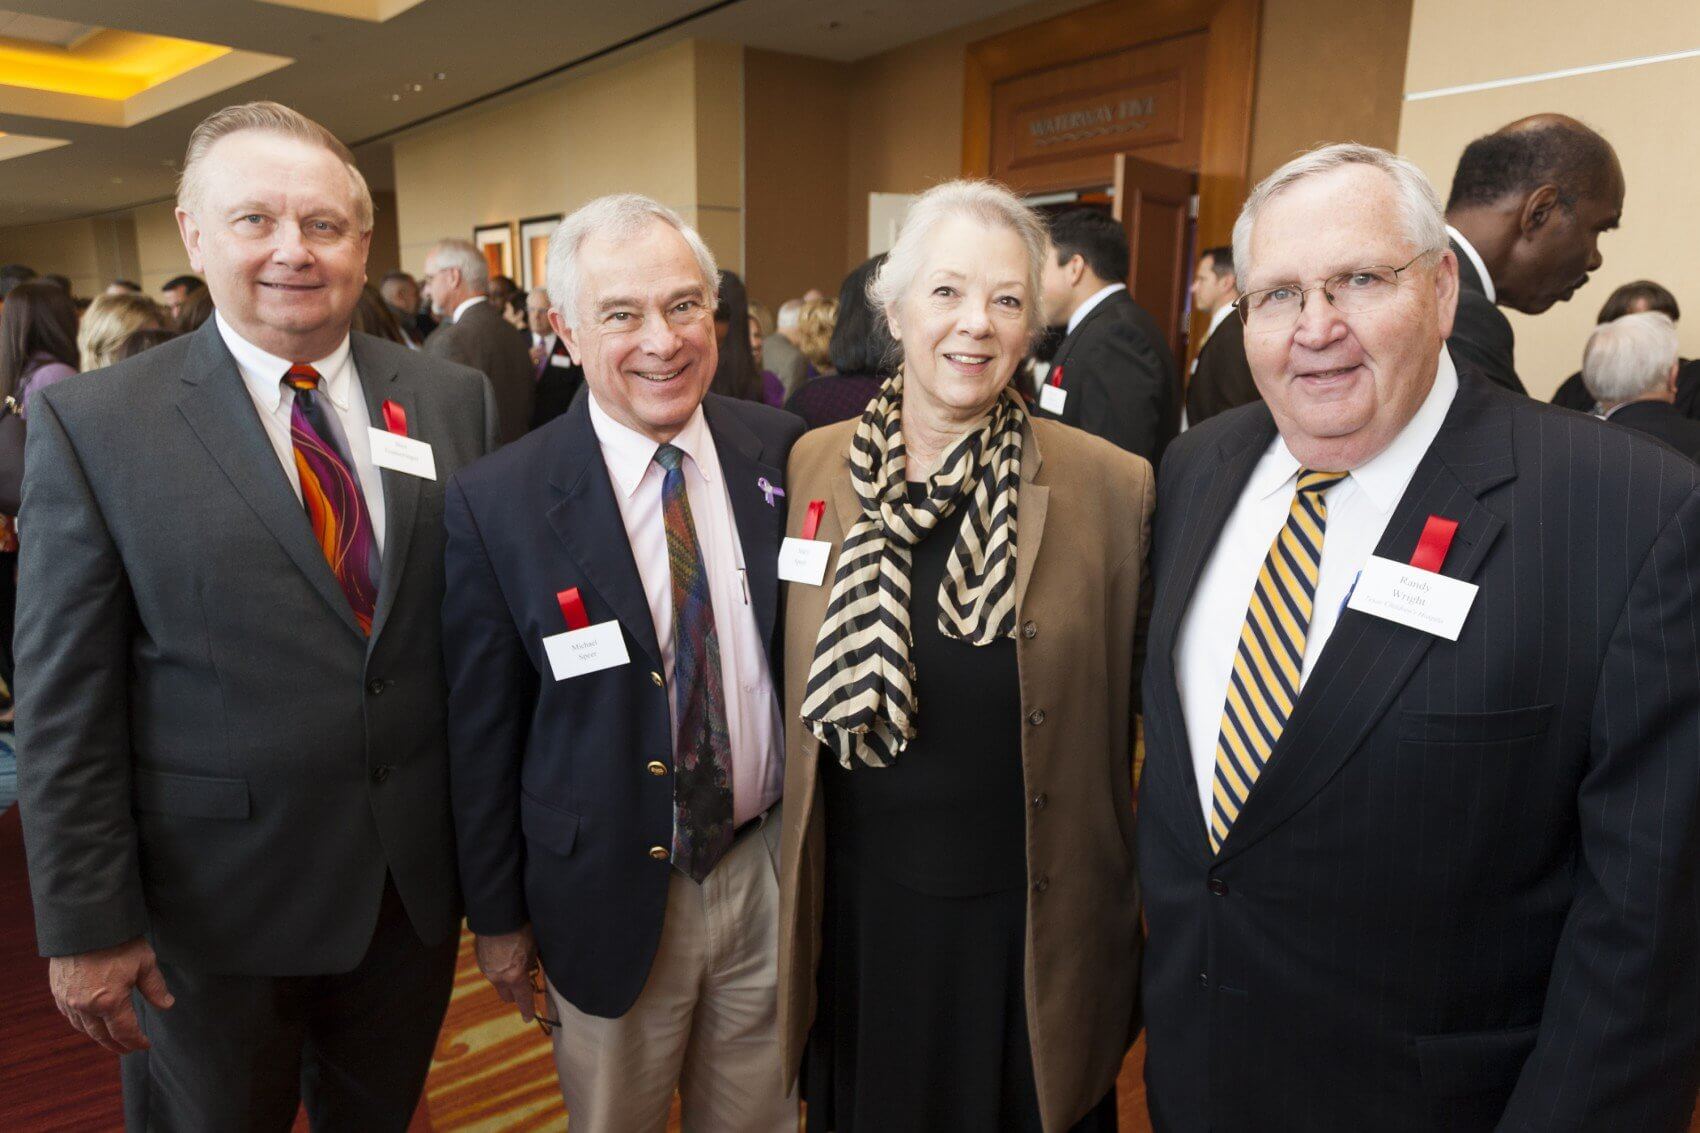 Bert Gumeringer, Michael and Mary Speer, and Randy Wright, executive vice president of Texas Children’s Hospital (Credit: John Lewis Photography)